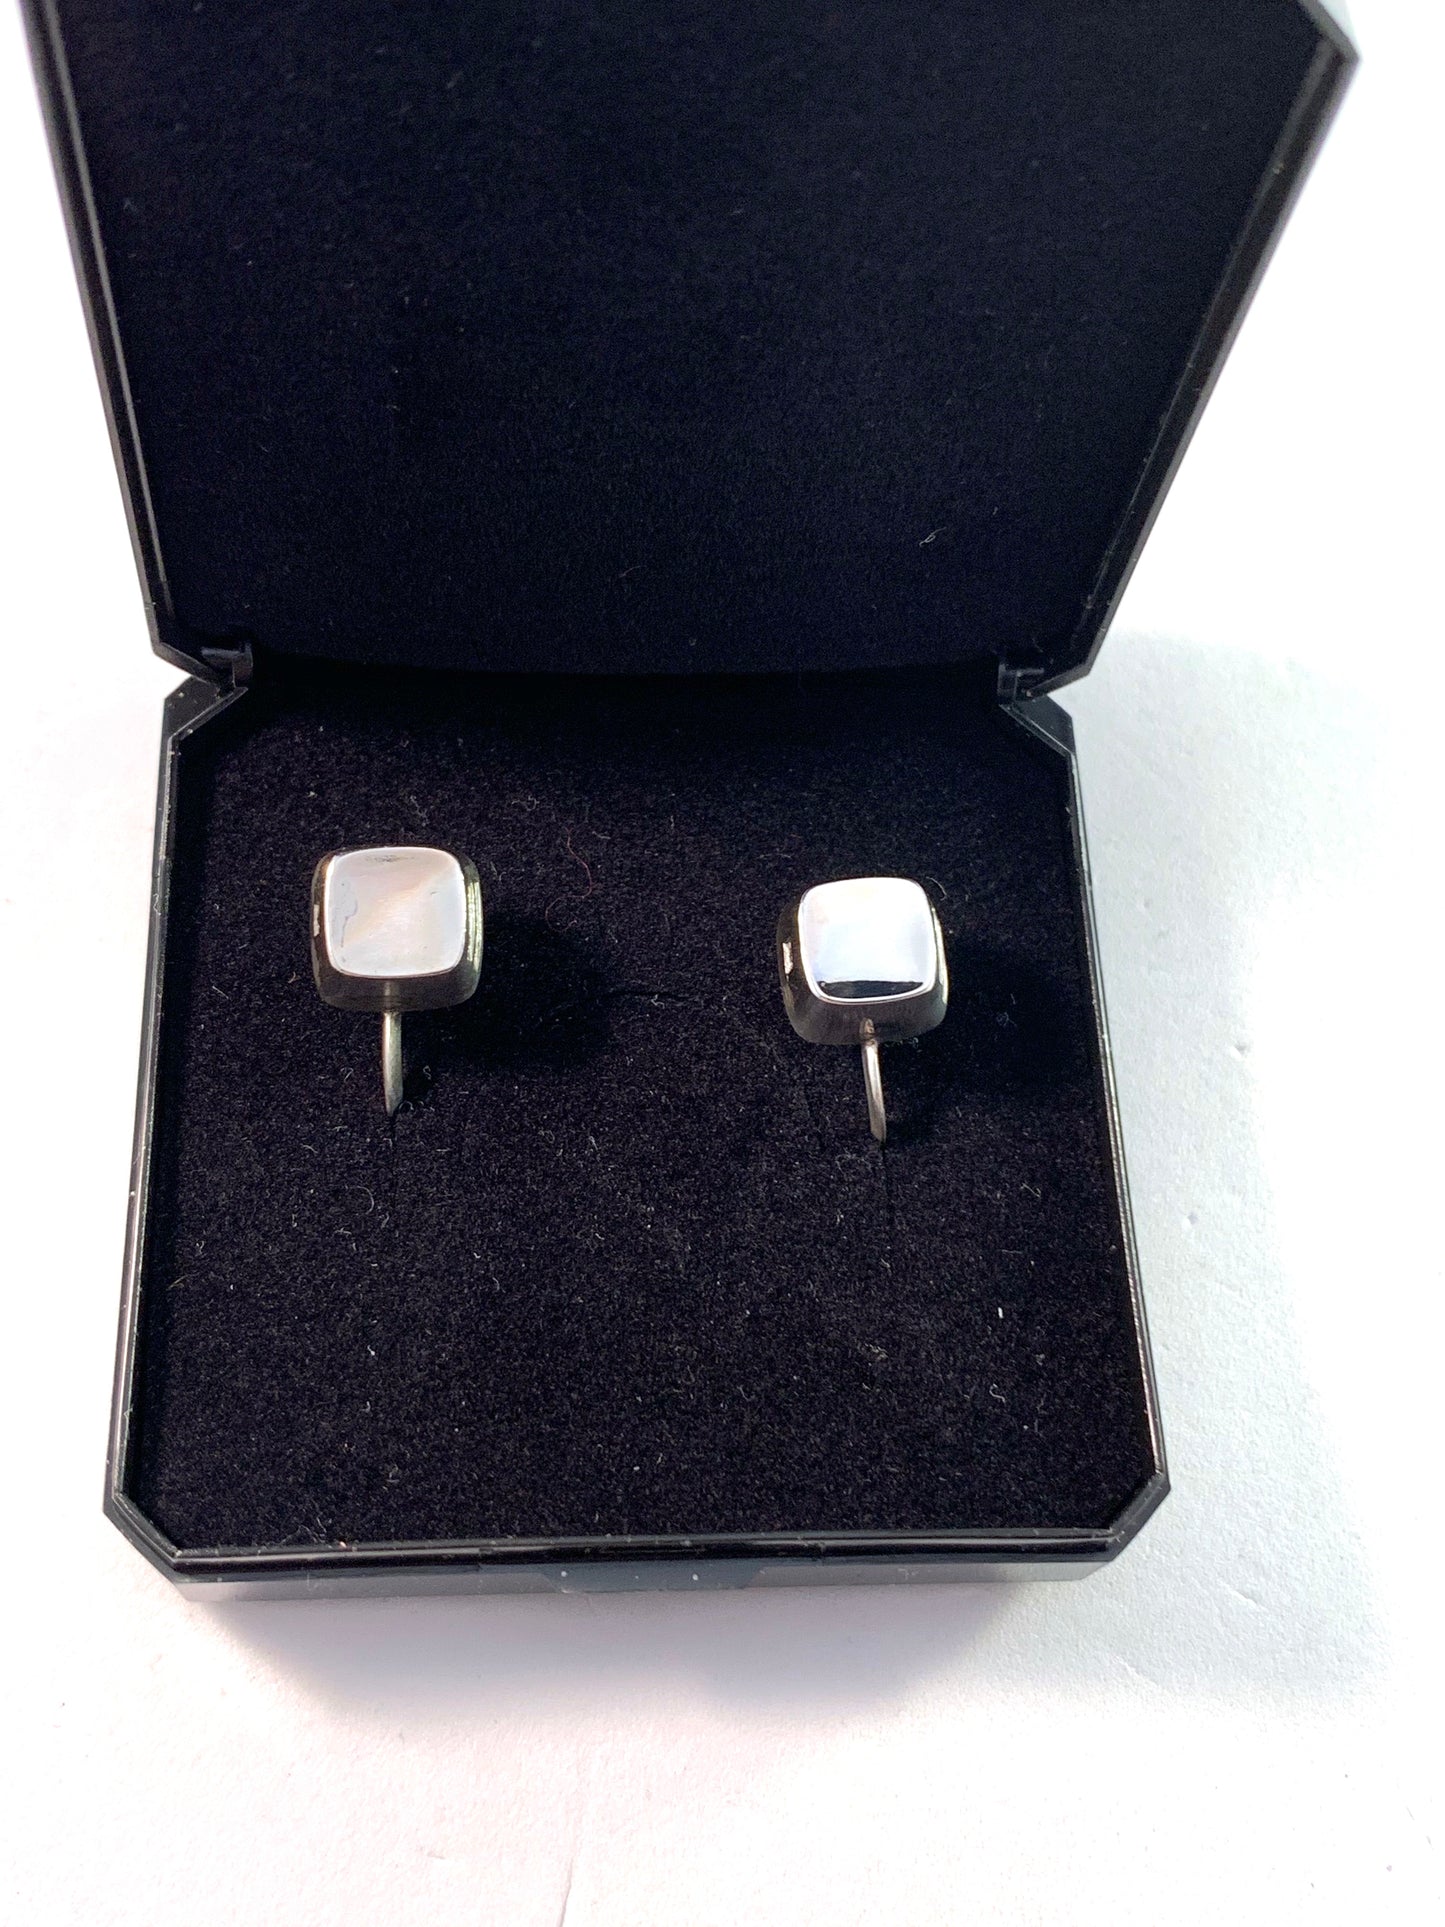 Sigurd Persson for Stigbert, Sweden year 1956, Iconic Cube Design Sterling Silver Earrings.